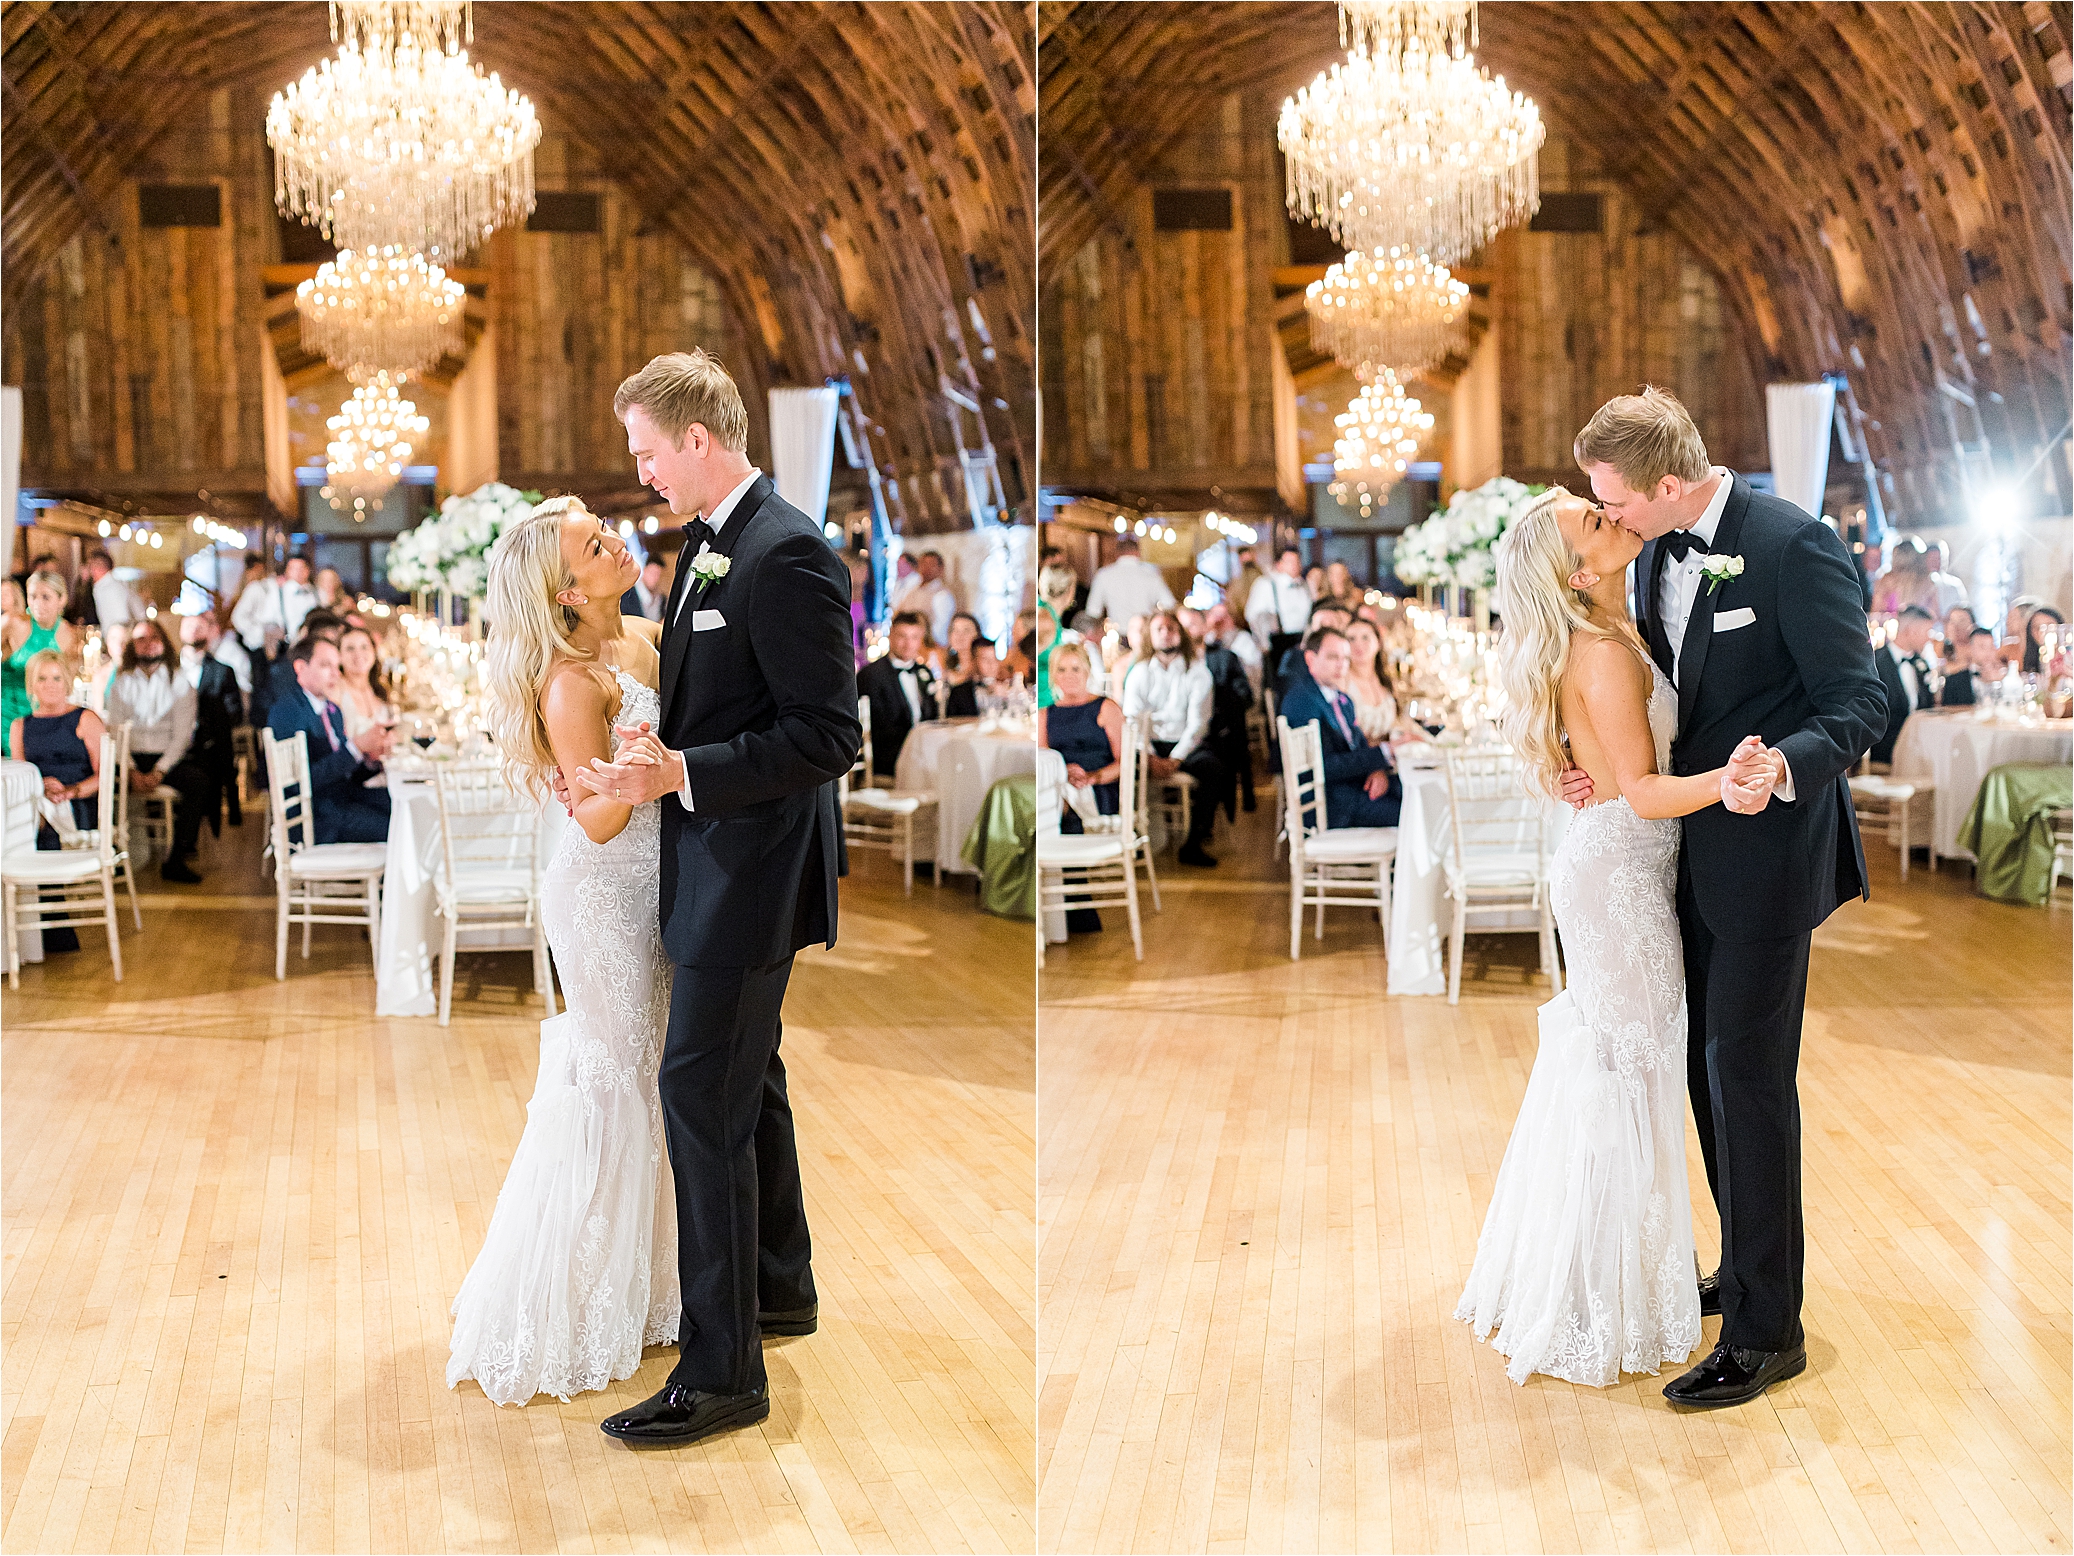 A bride and groom share their first dance and kiss in their brown barn style wedding as their guests look on. 